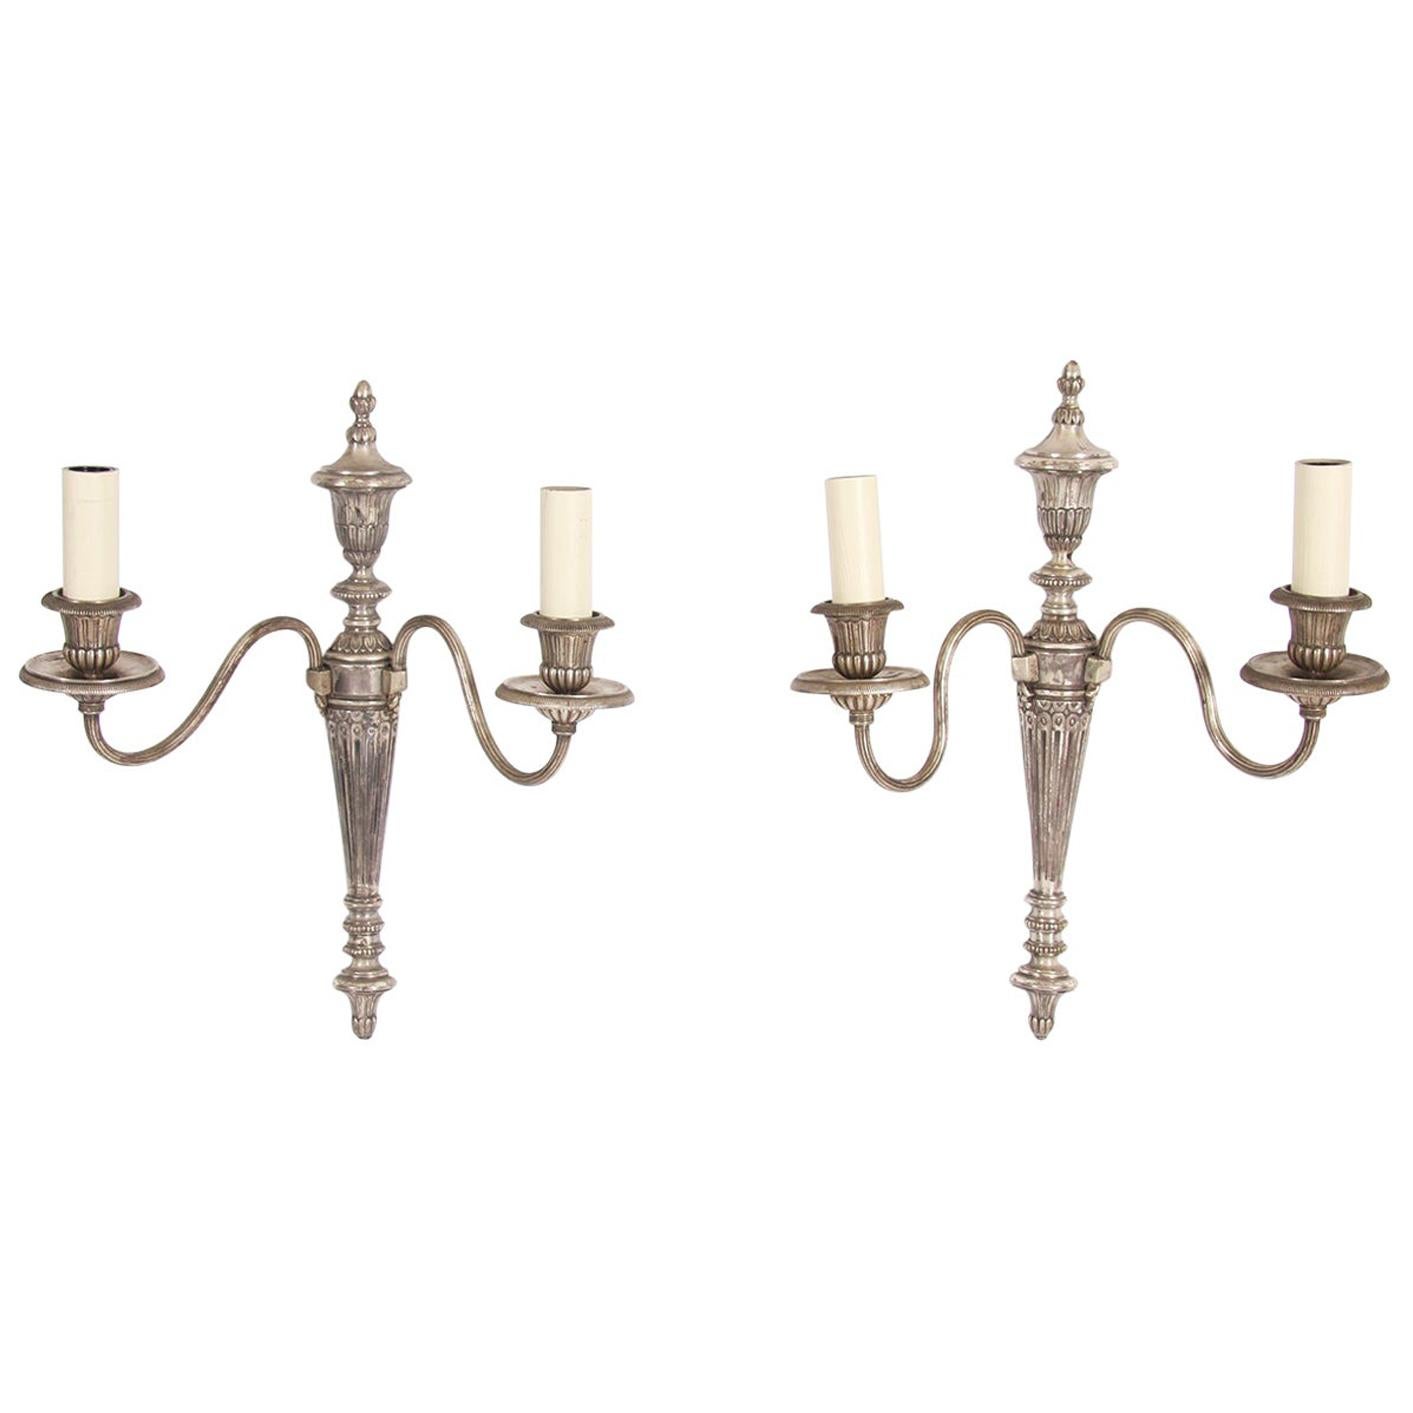 1930s French Pair of Silver Plated Electric Wall Sconces For Sale